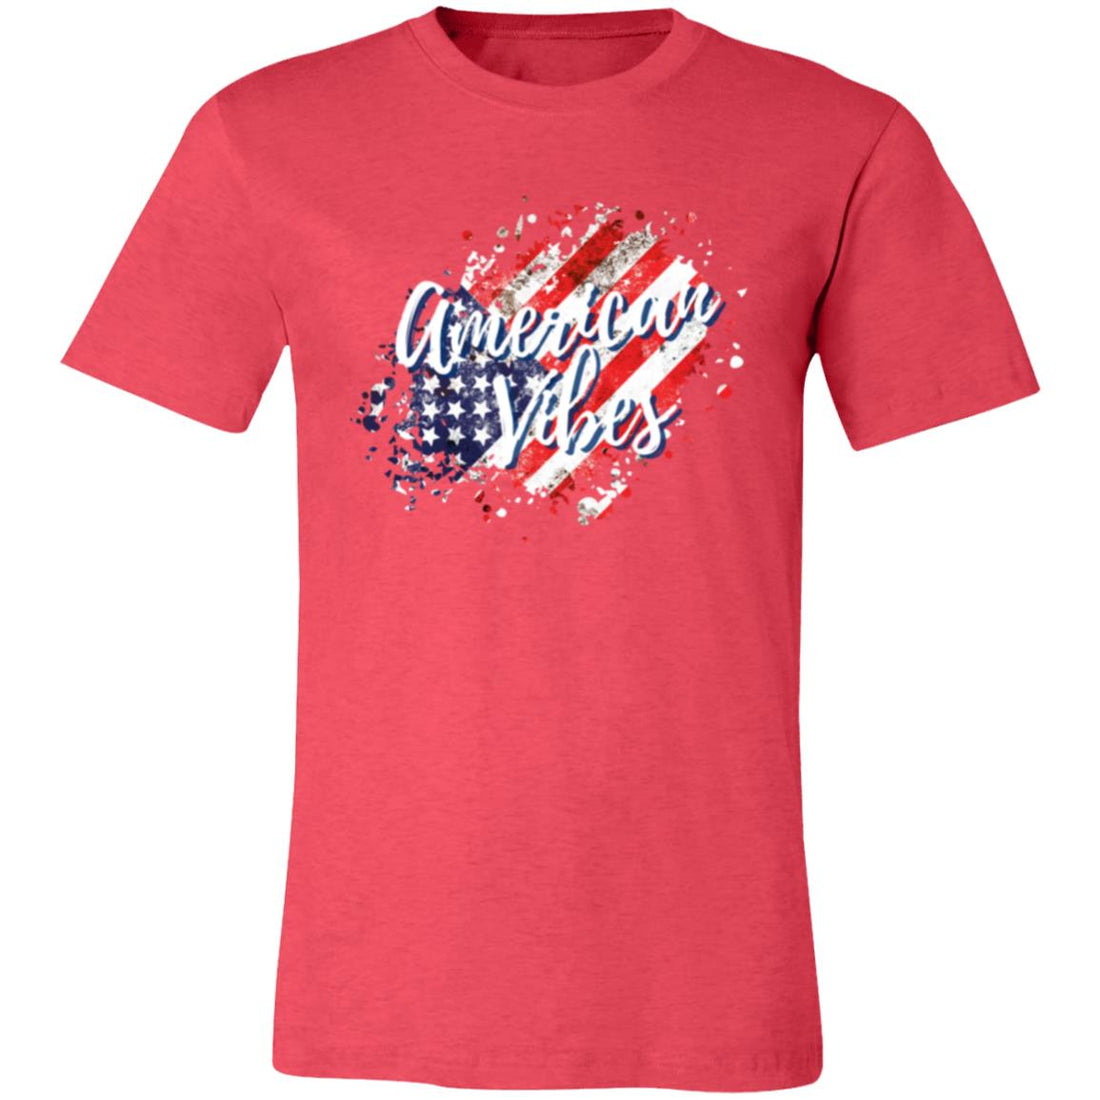 American Vibes T-Shirt - T-Shirts - Positively Sassy - American Vibes T-Shirt